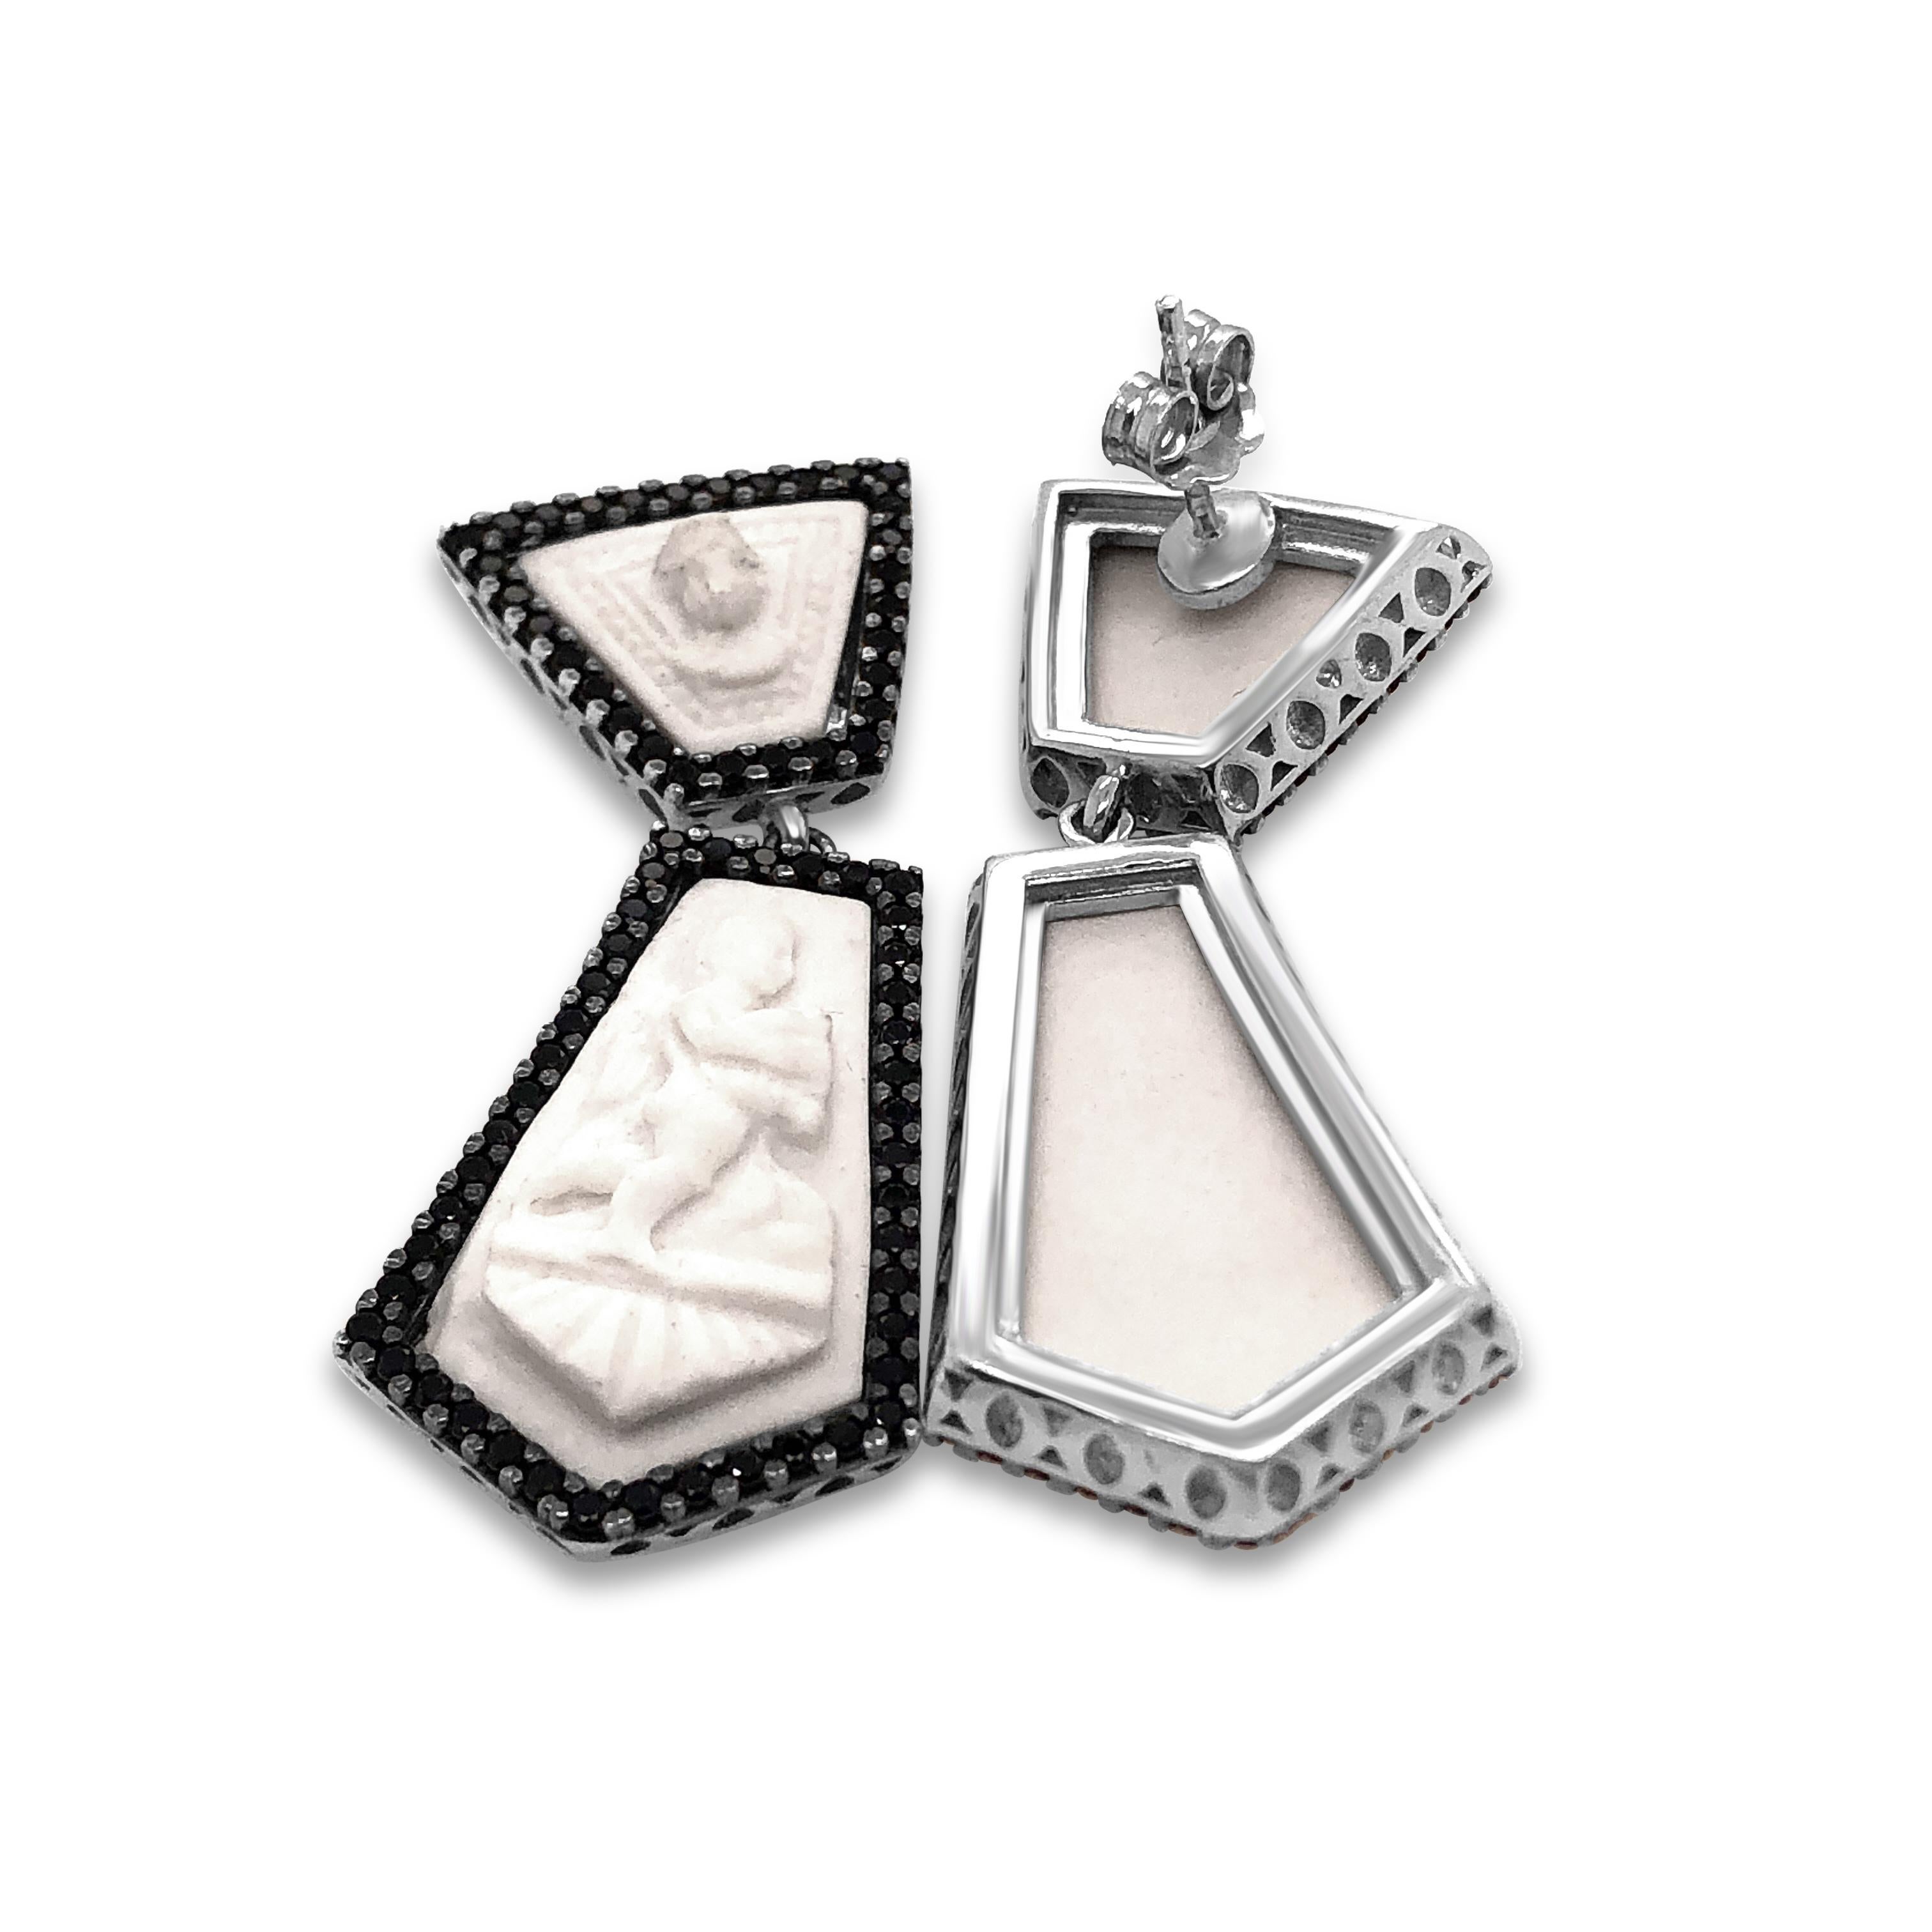 Finely detailed porcelain cameos depicting renaissance period cupids playing chitara. In times past, cameos were mainly made of shells, hardstones, coral and volcanic rock, instead today the cameos which bears our family’s signature are made of fine